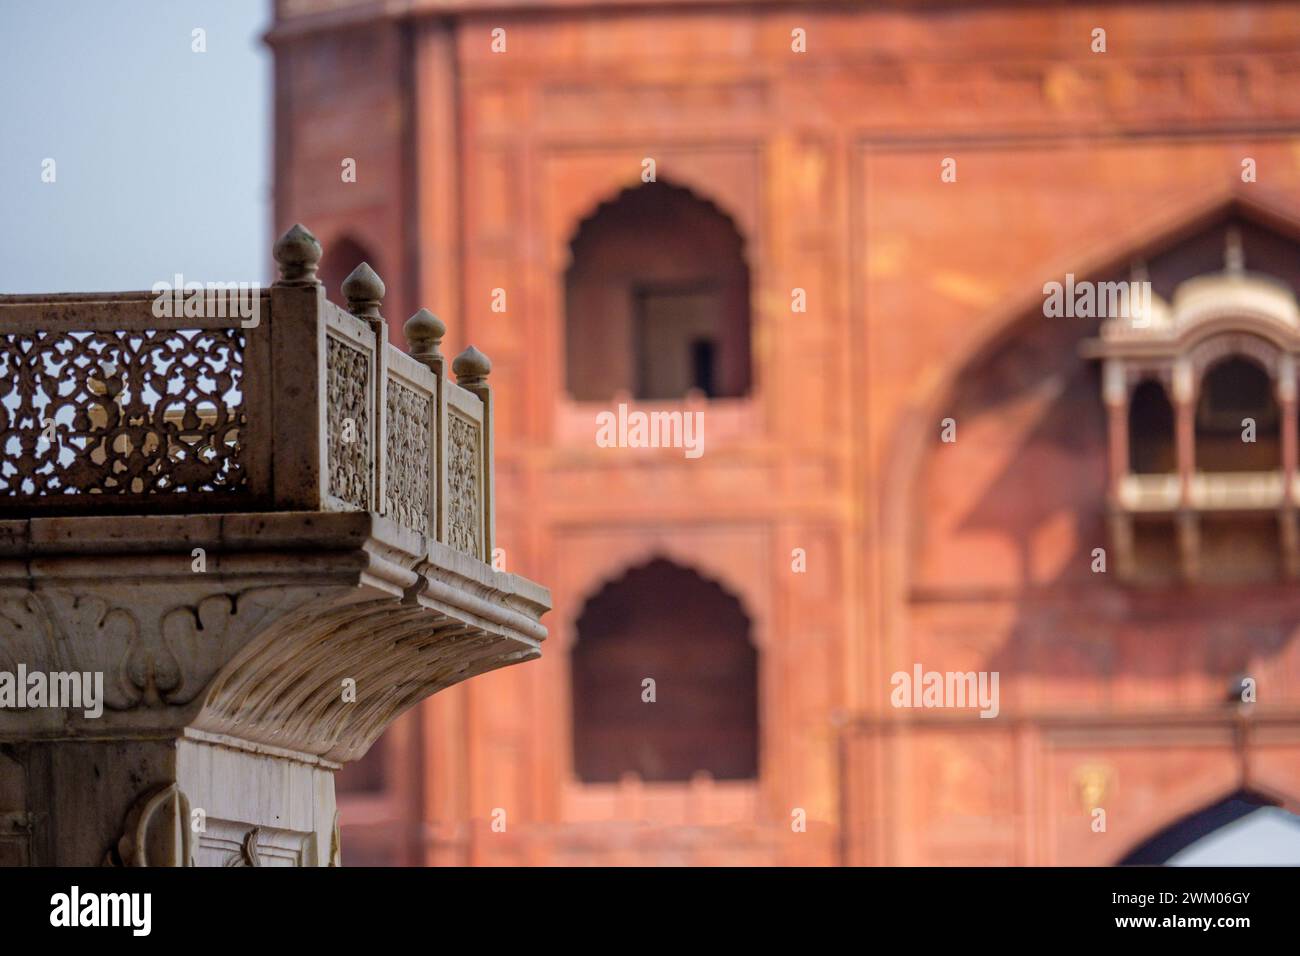 Islamic architecture at the Jama Masjid mosque in Delhi which is the largest mosque in India Stock Photo